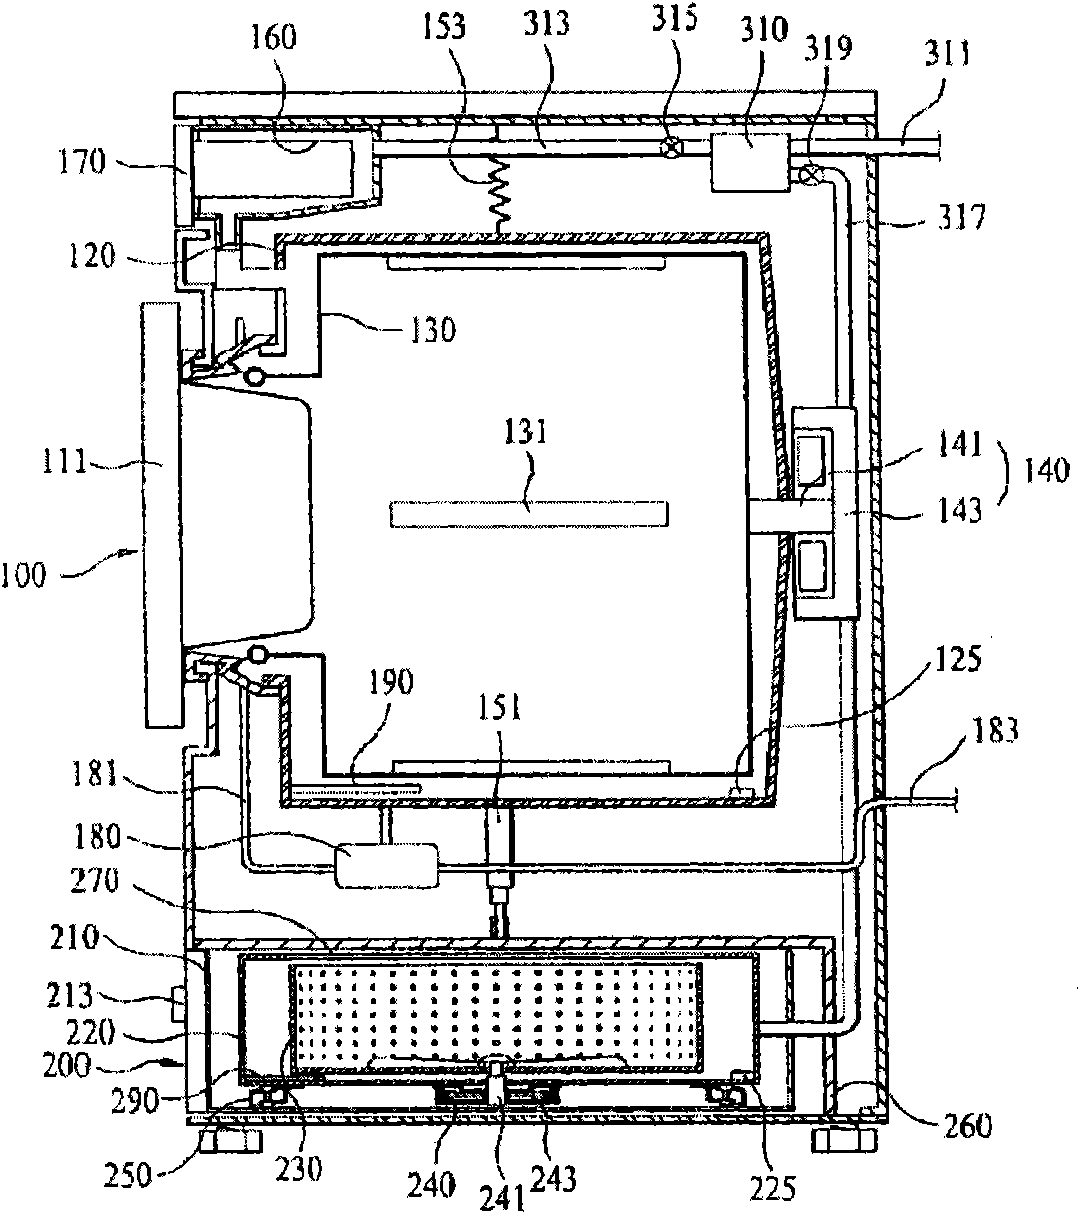 Laundry treating device and method of controlling the same